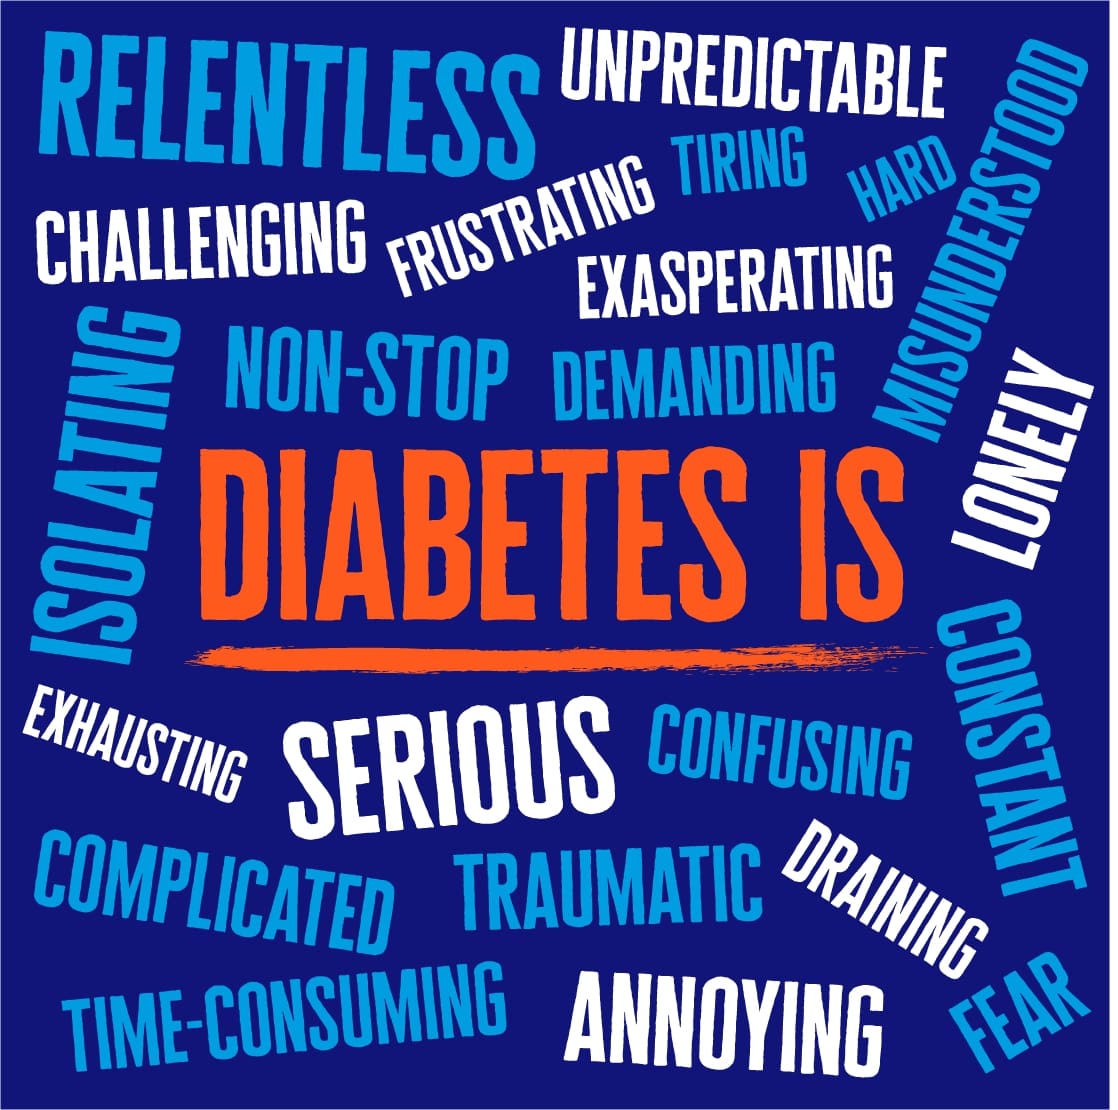 Thank you so much to everyone who told us how they would sum up life with diabetes in one word ✍️ It's clear that diabetes means many different things to different people, as each of us has our own unique story to share. (1/3)